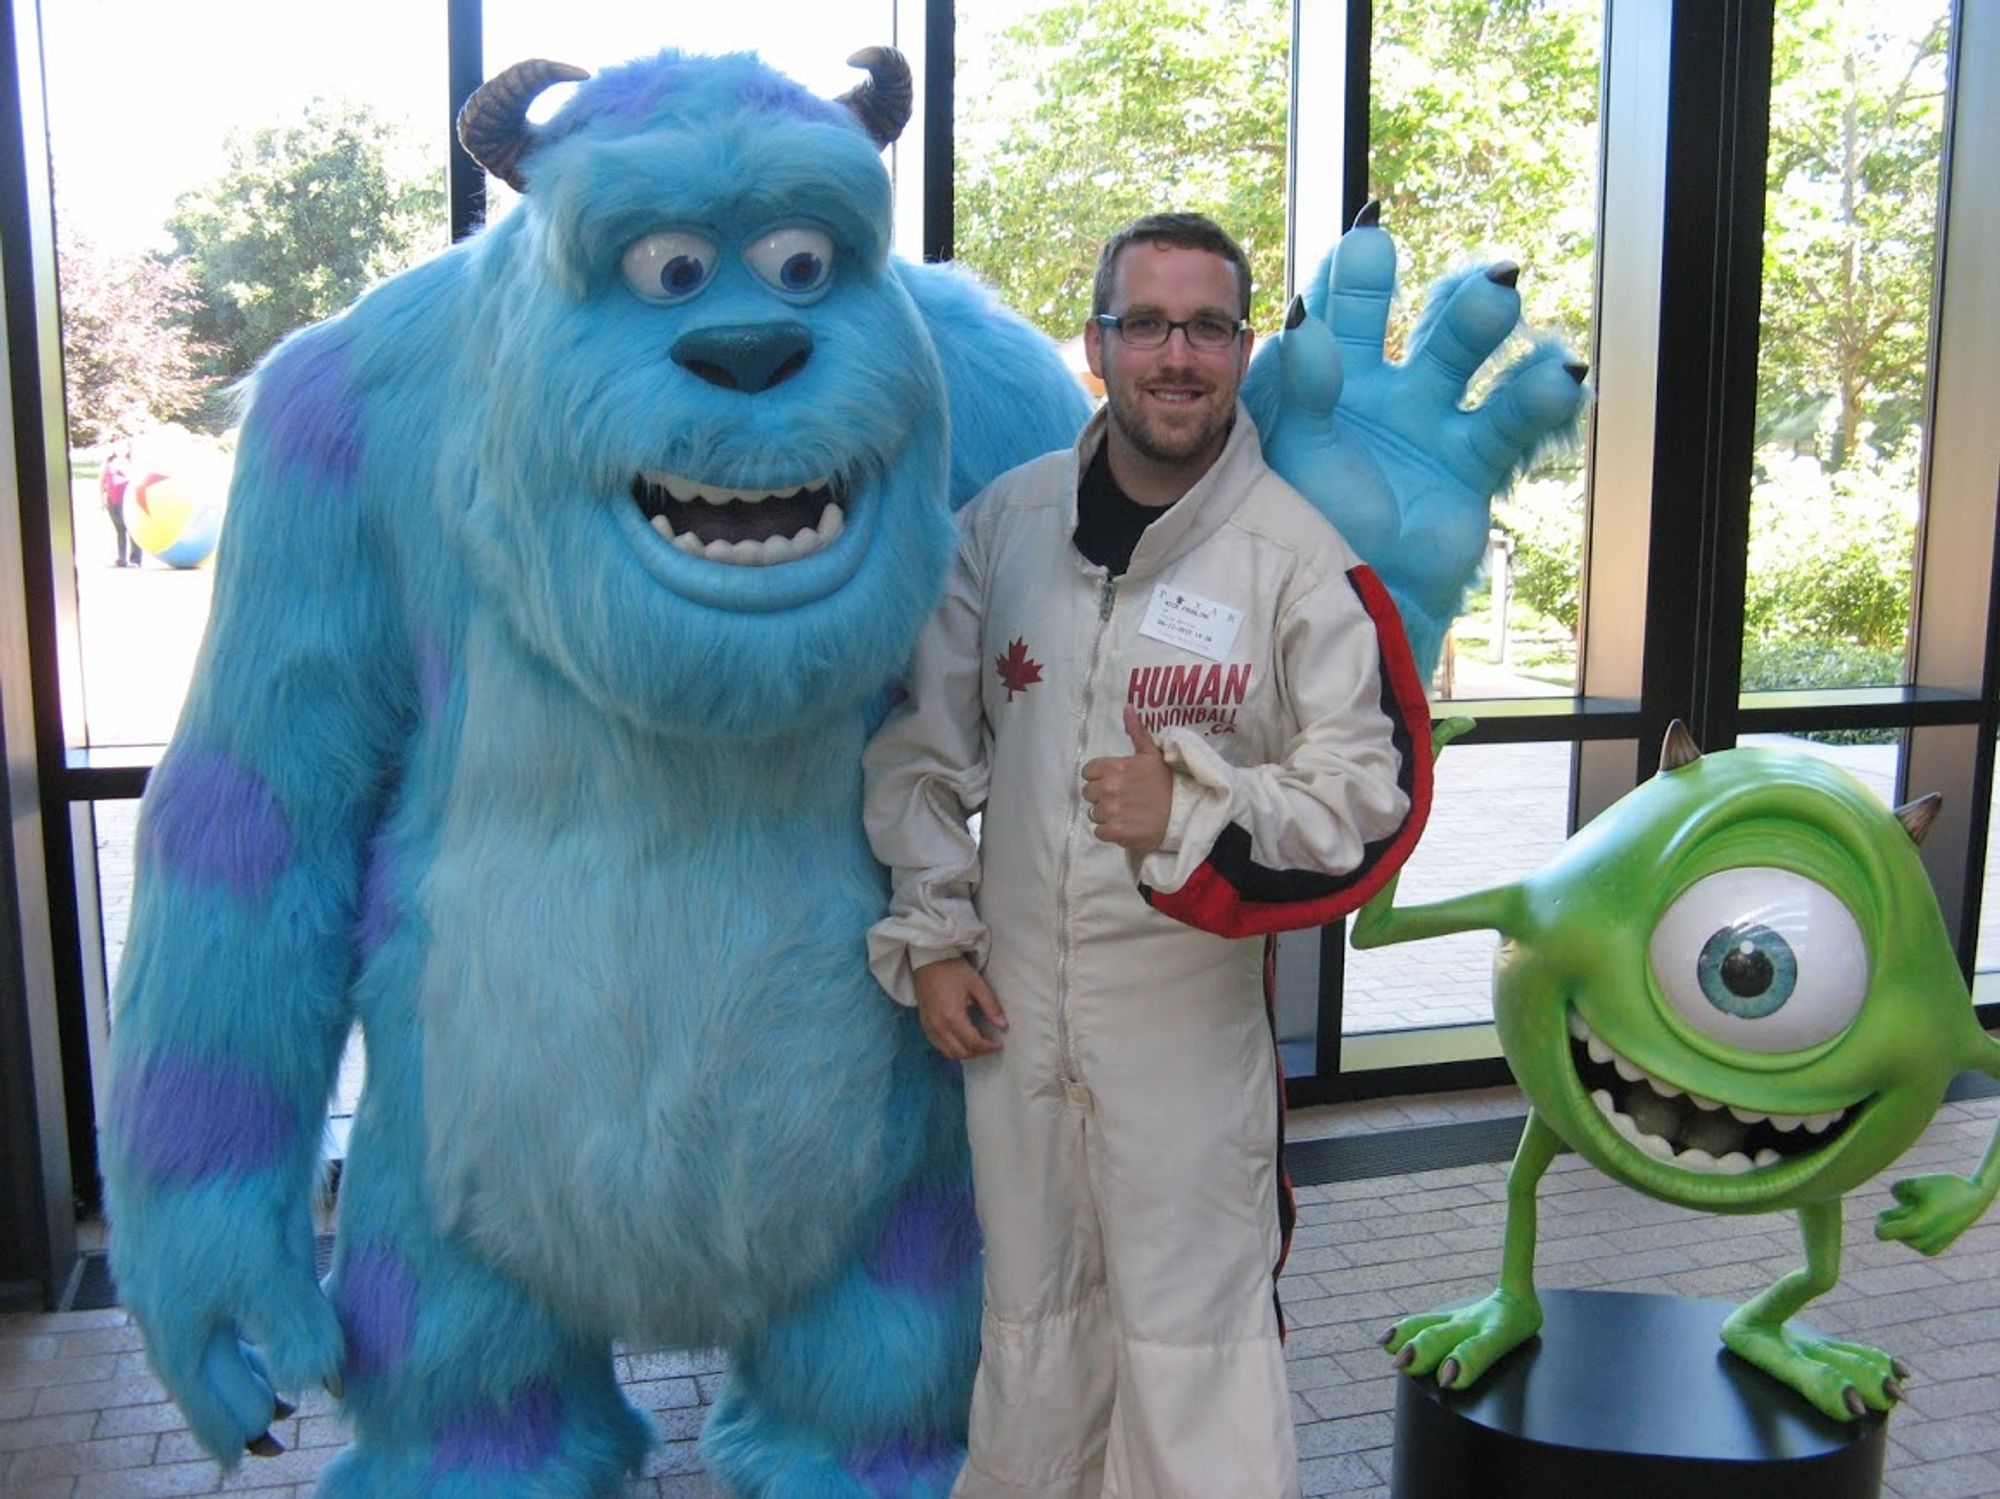 Nick the Human Cannonball poses at Pixar with Mike & Sully